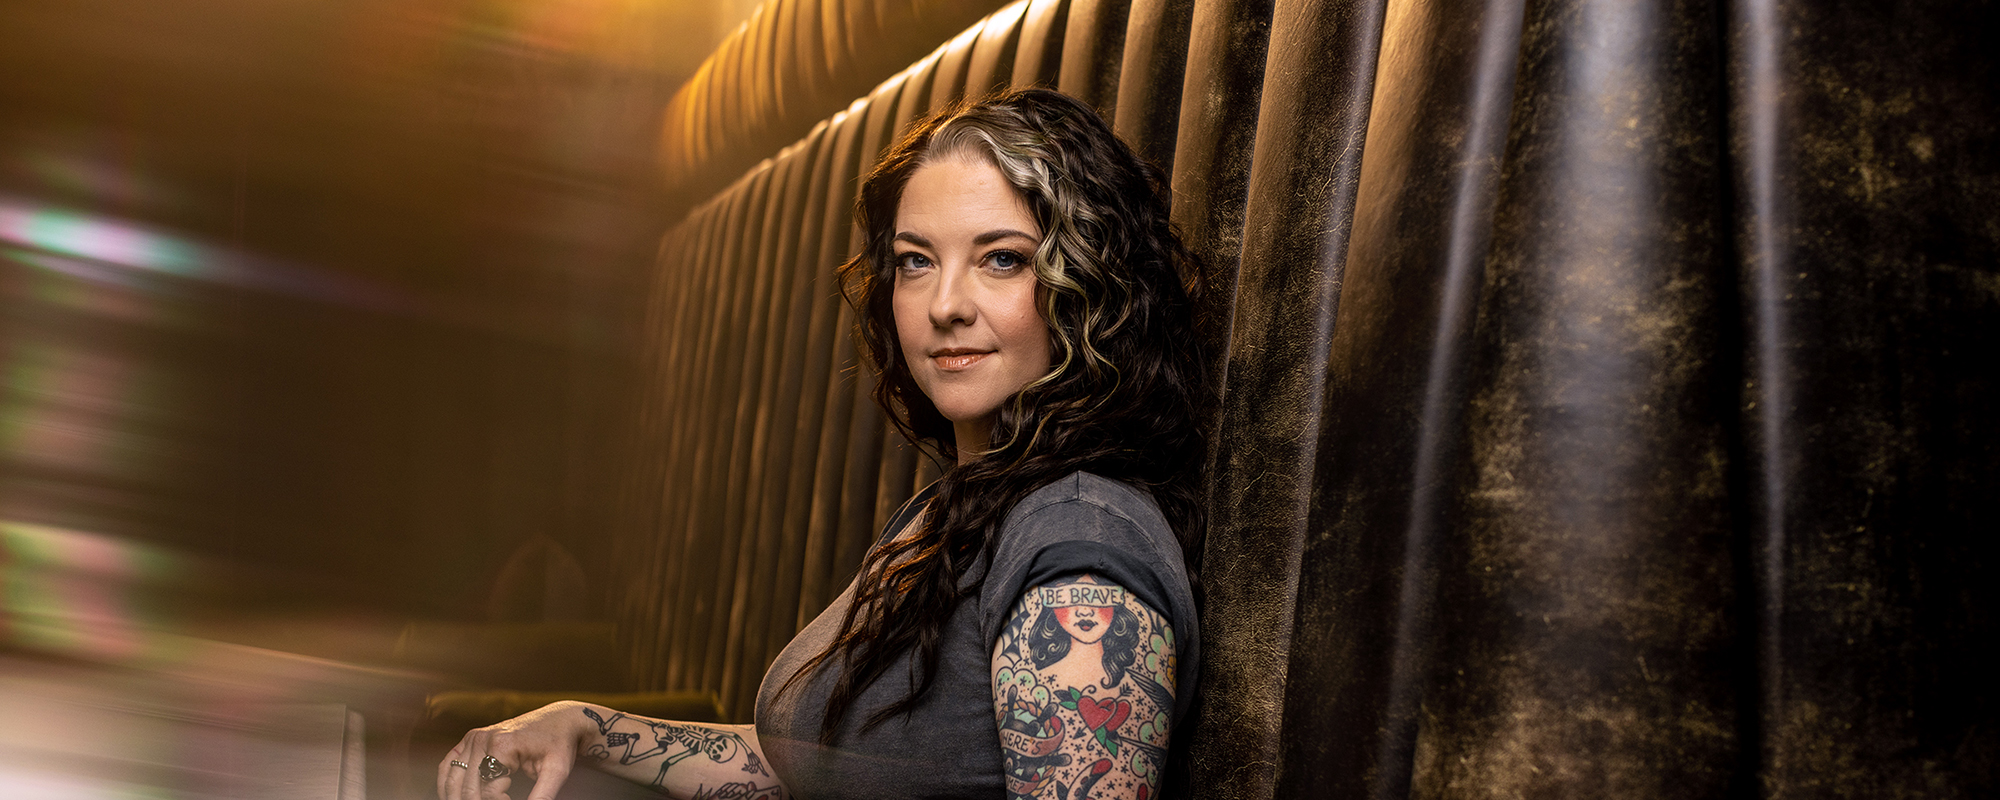 Ashley McBryde Talks Recovery Journey Following Horseback Riding Accident